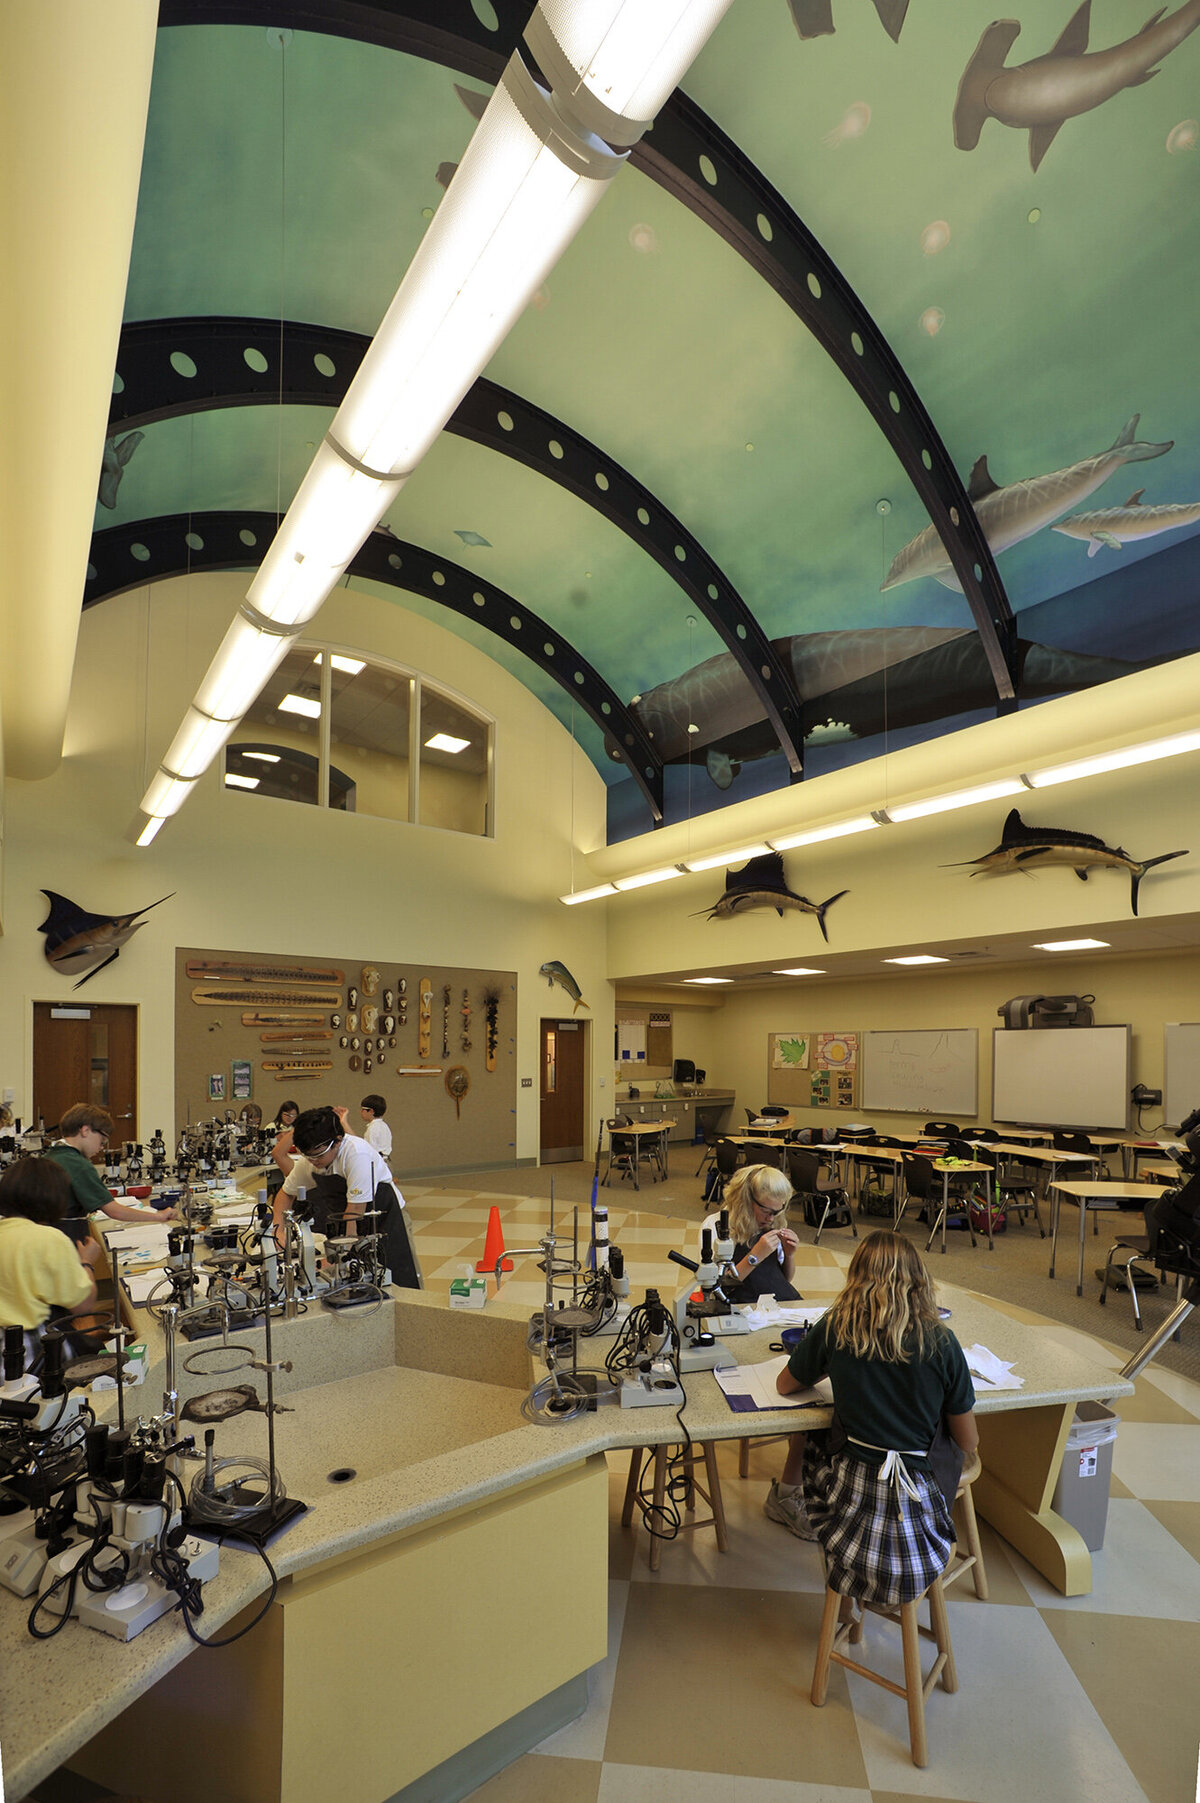 interior view of the science lab at Savannah Country Day School with vaulted ceiling and mural painting on the ceiling